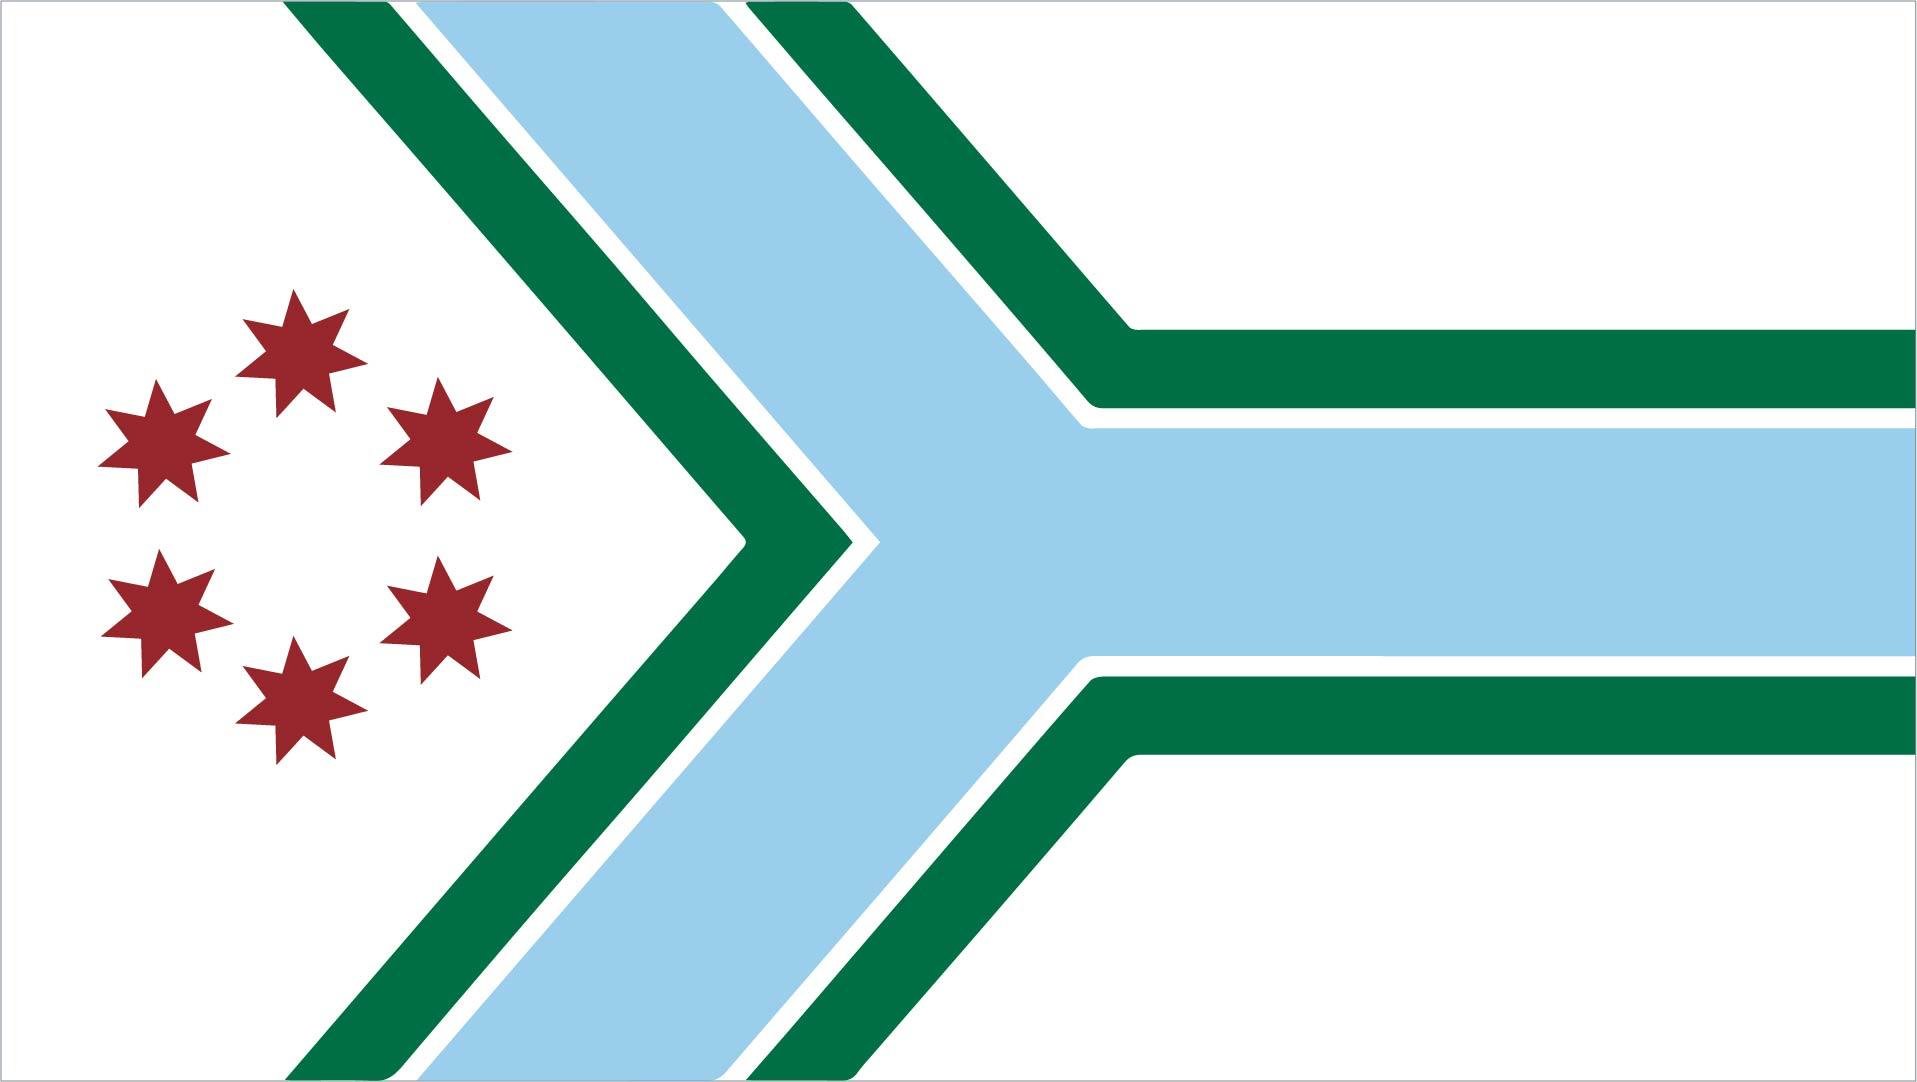 The winning flag design. (Cook County Government)